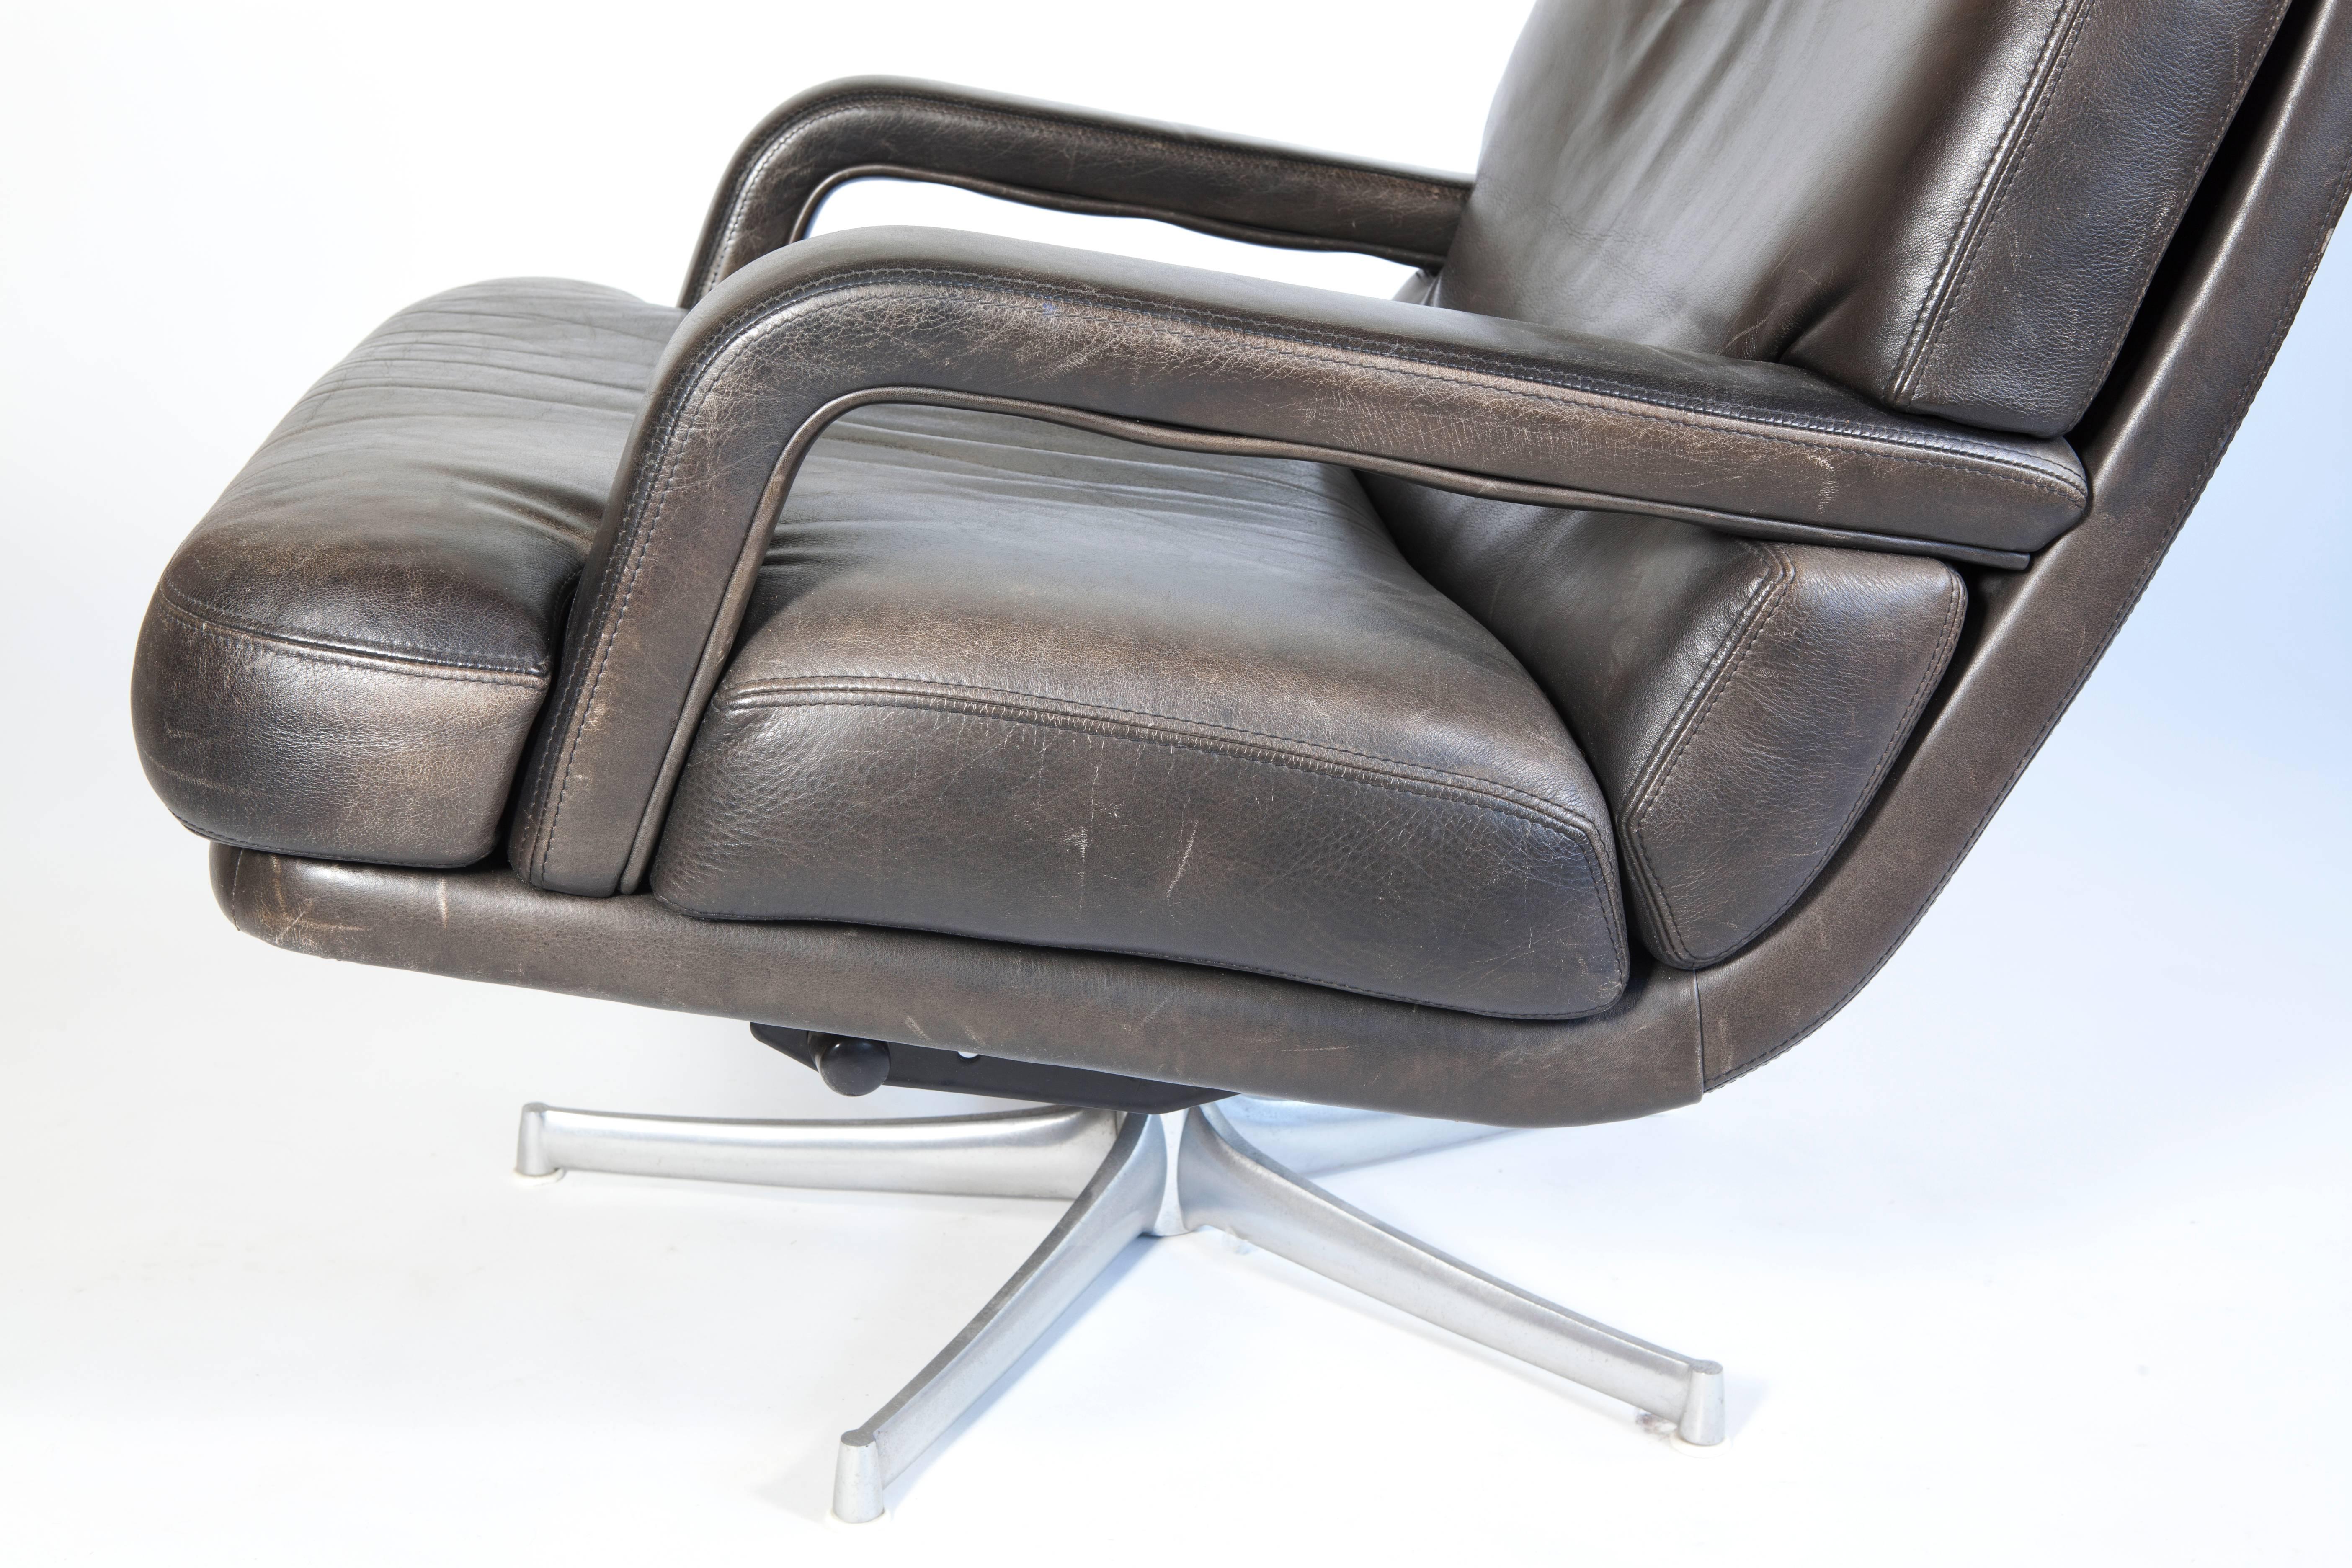 German Leather Lounge Chair 'Don' by Bernd Münzebrock for Walter Knoll, 1970s For Sale